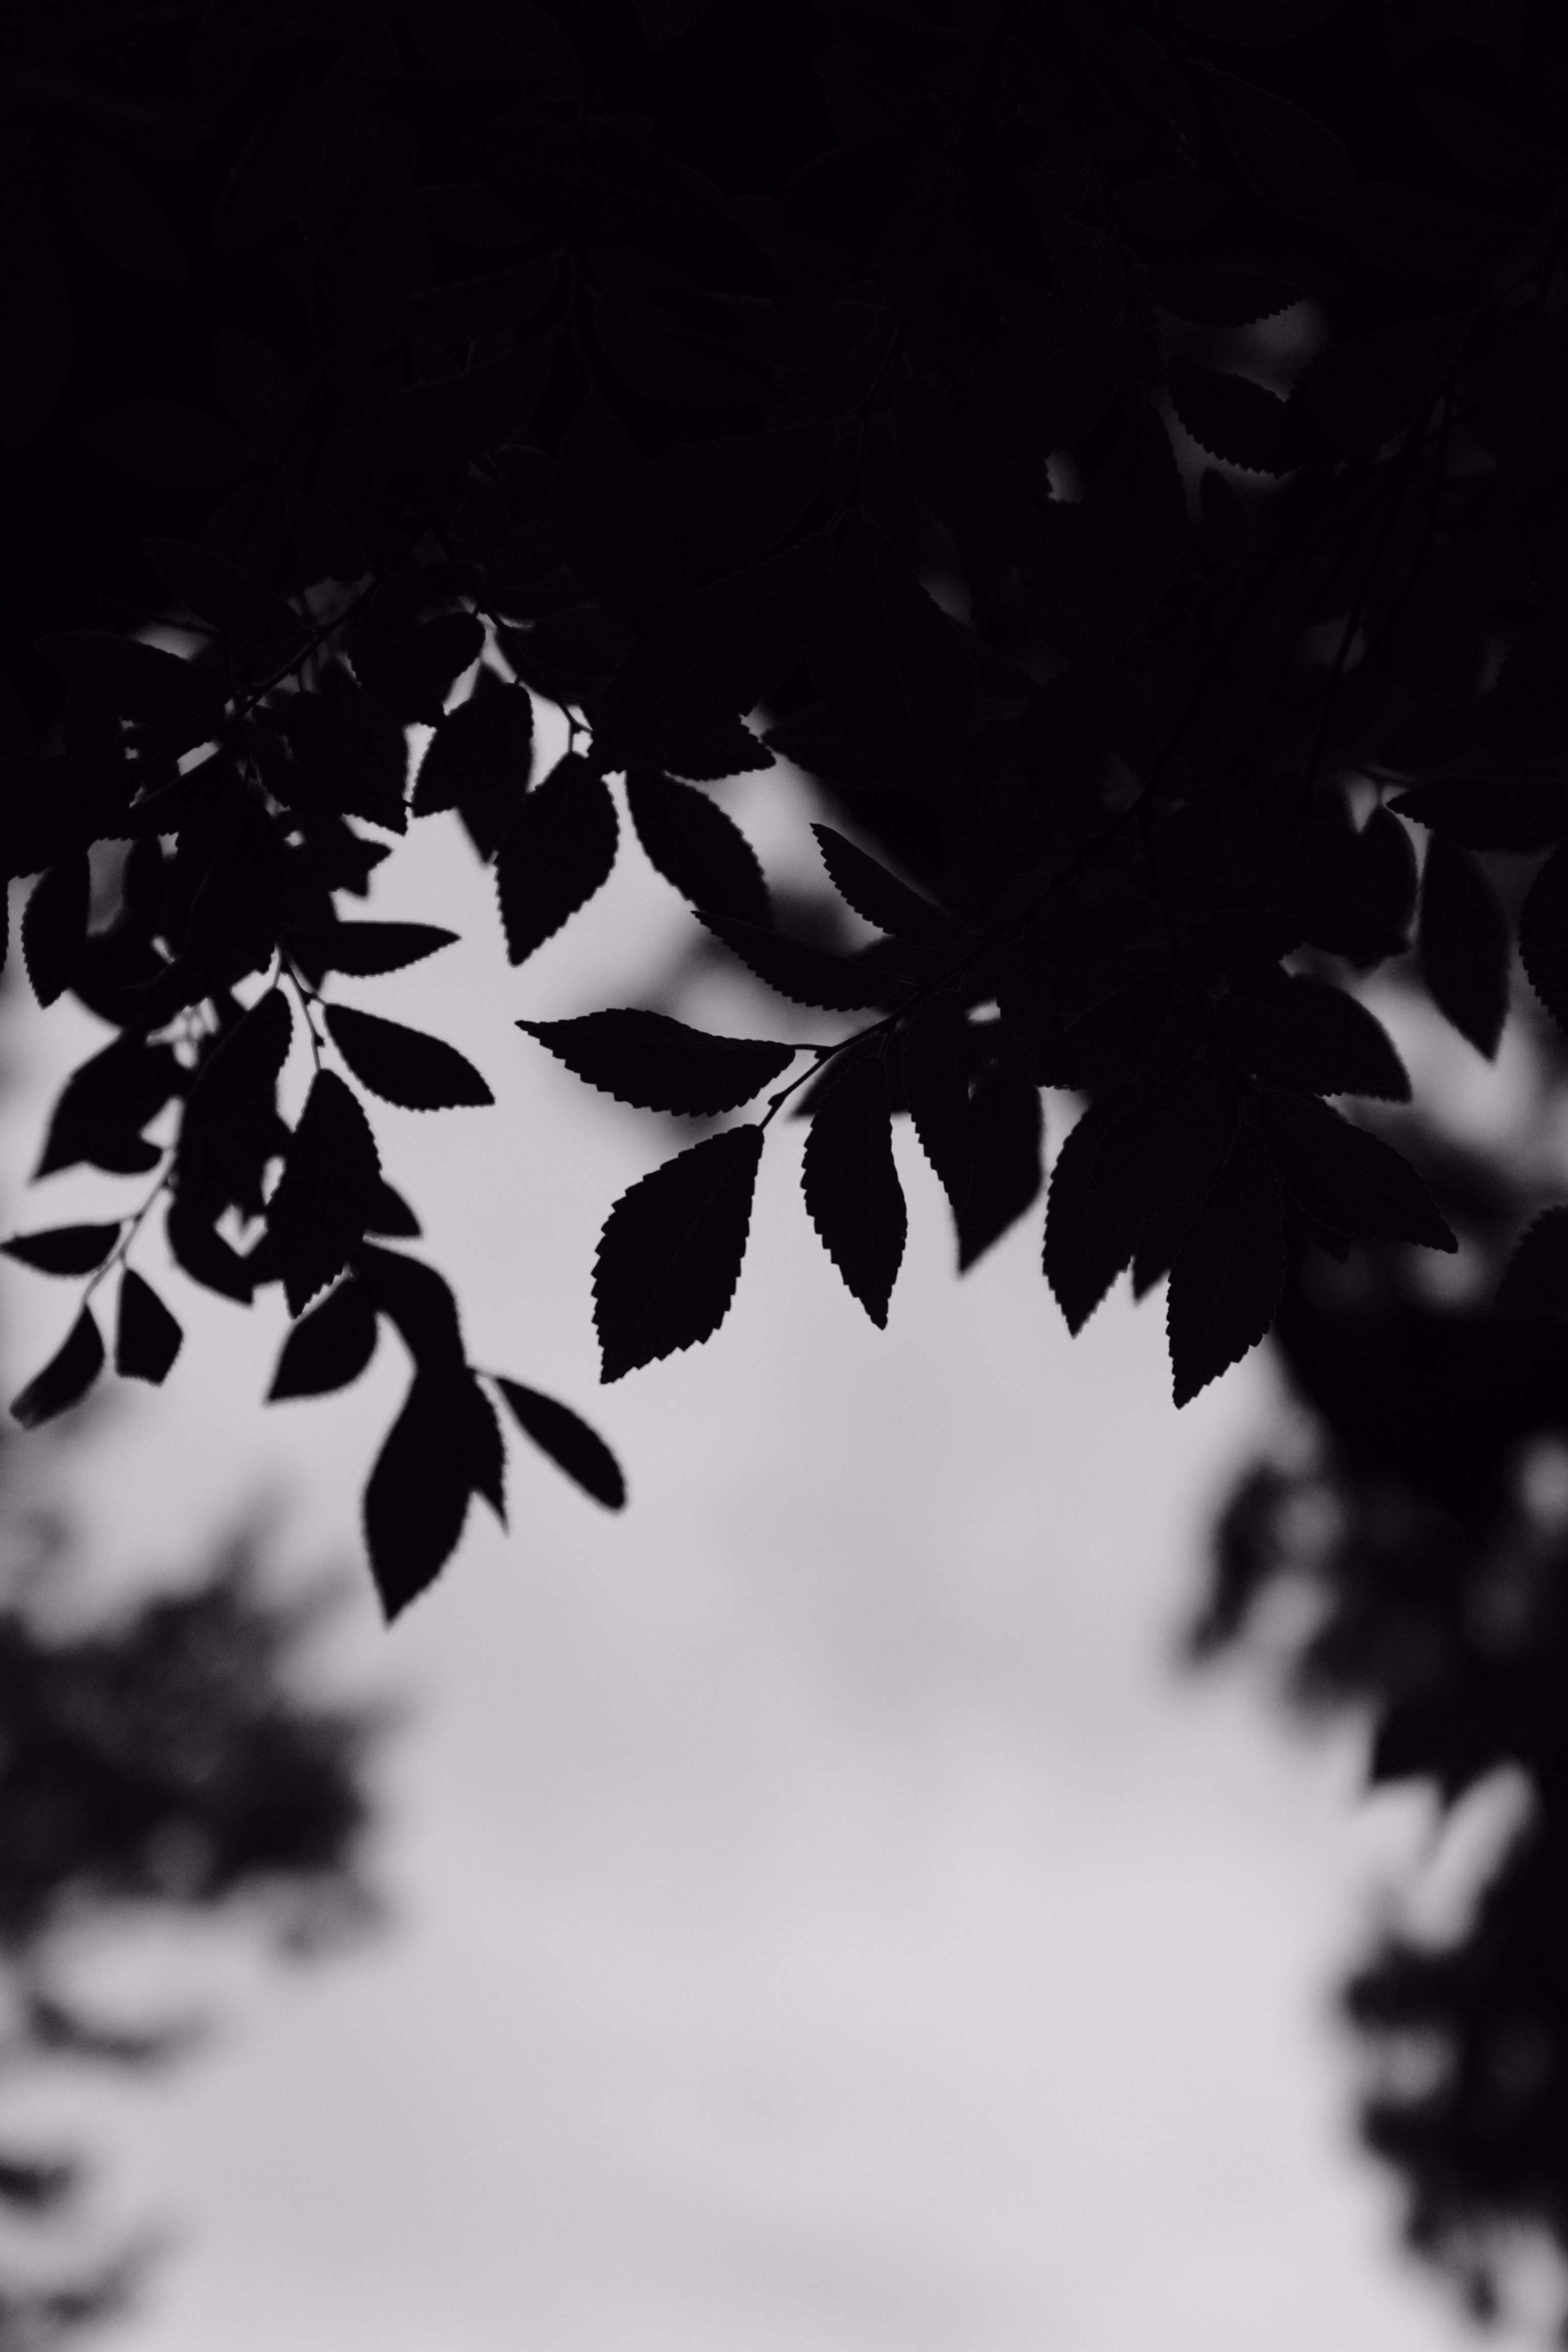 outlines, leaves, black, branches, bw, chb